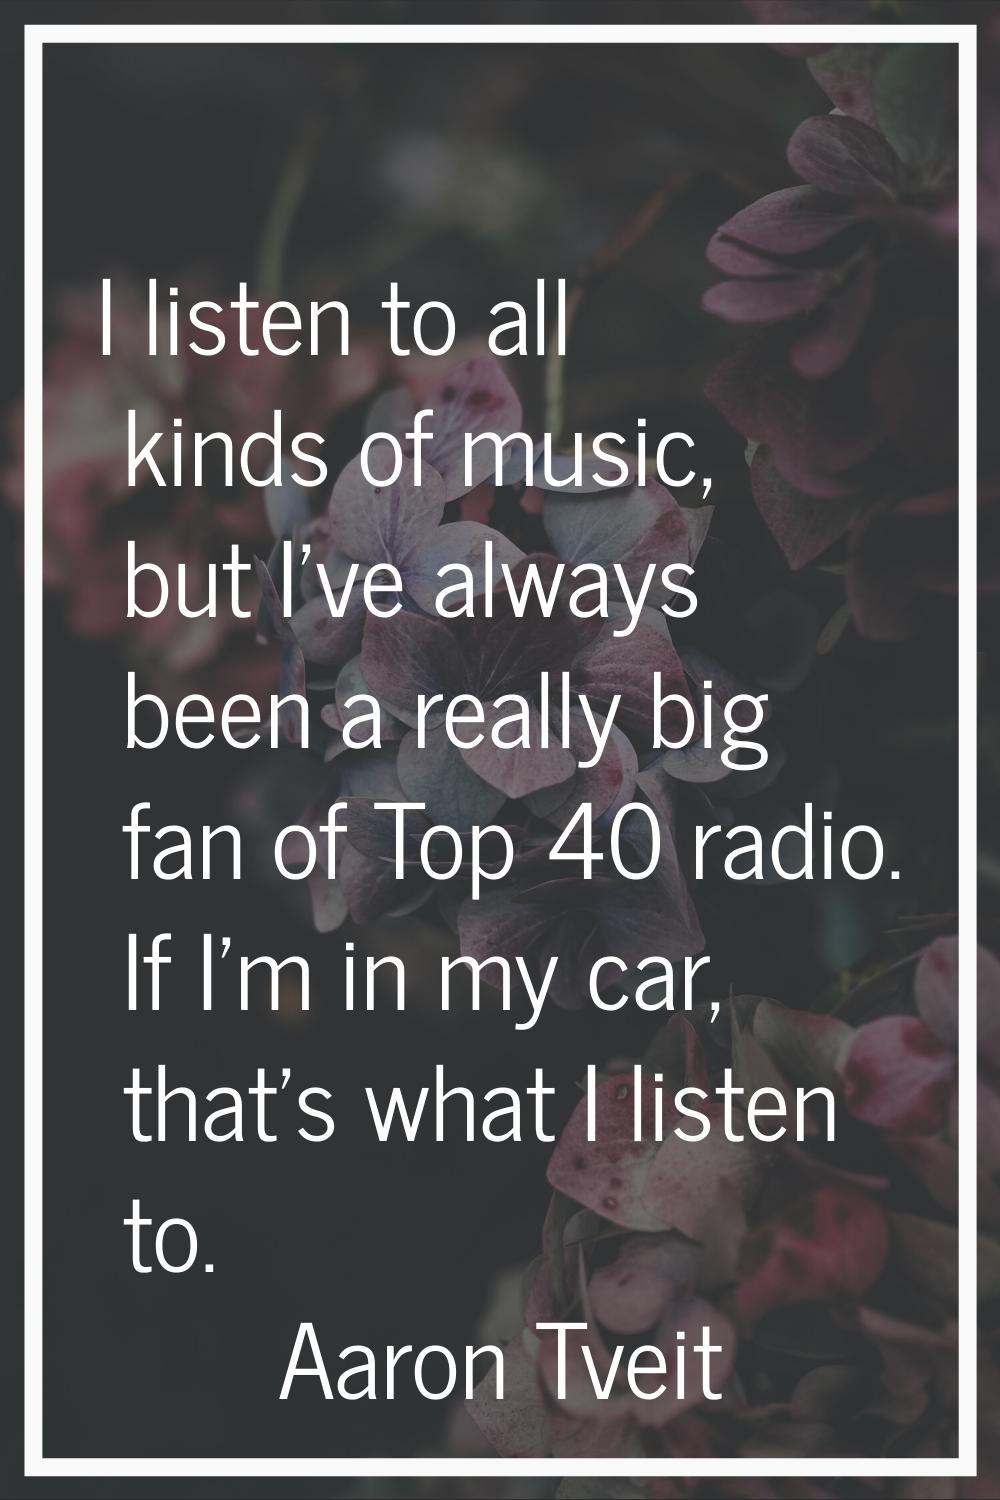 I listen to all kinds of music, but I've always been a really big fan of Top 40 radio. If I'm in my